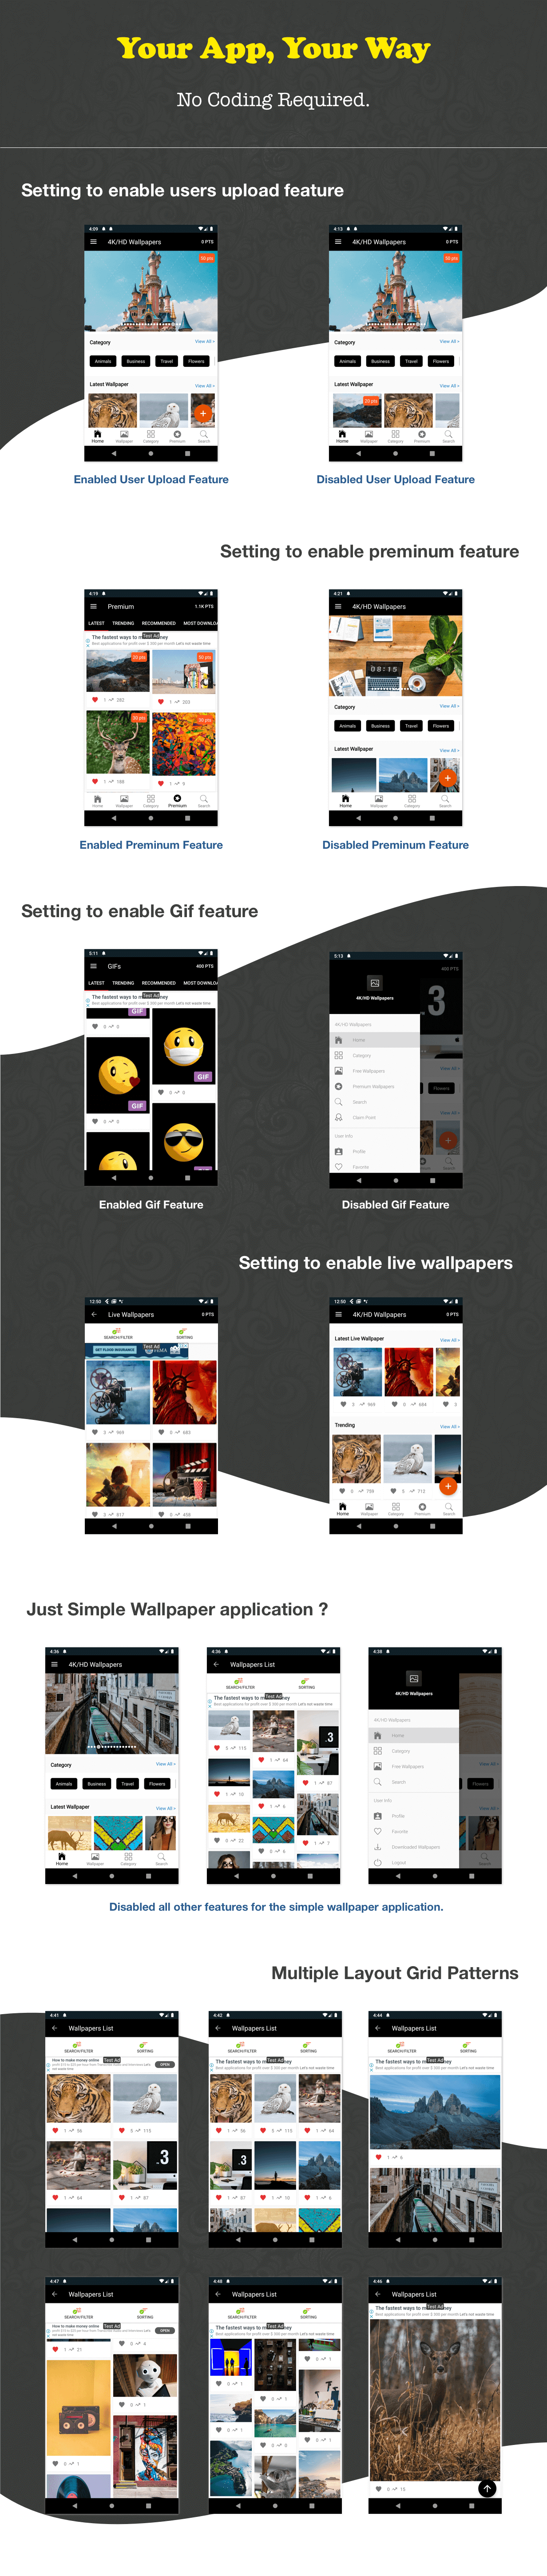 4K/HD Wallpaper Android App ( Auto Shuffle + Gif + Live + Admob + Firebase Noti + PHP Backend) 3.1 - 4